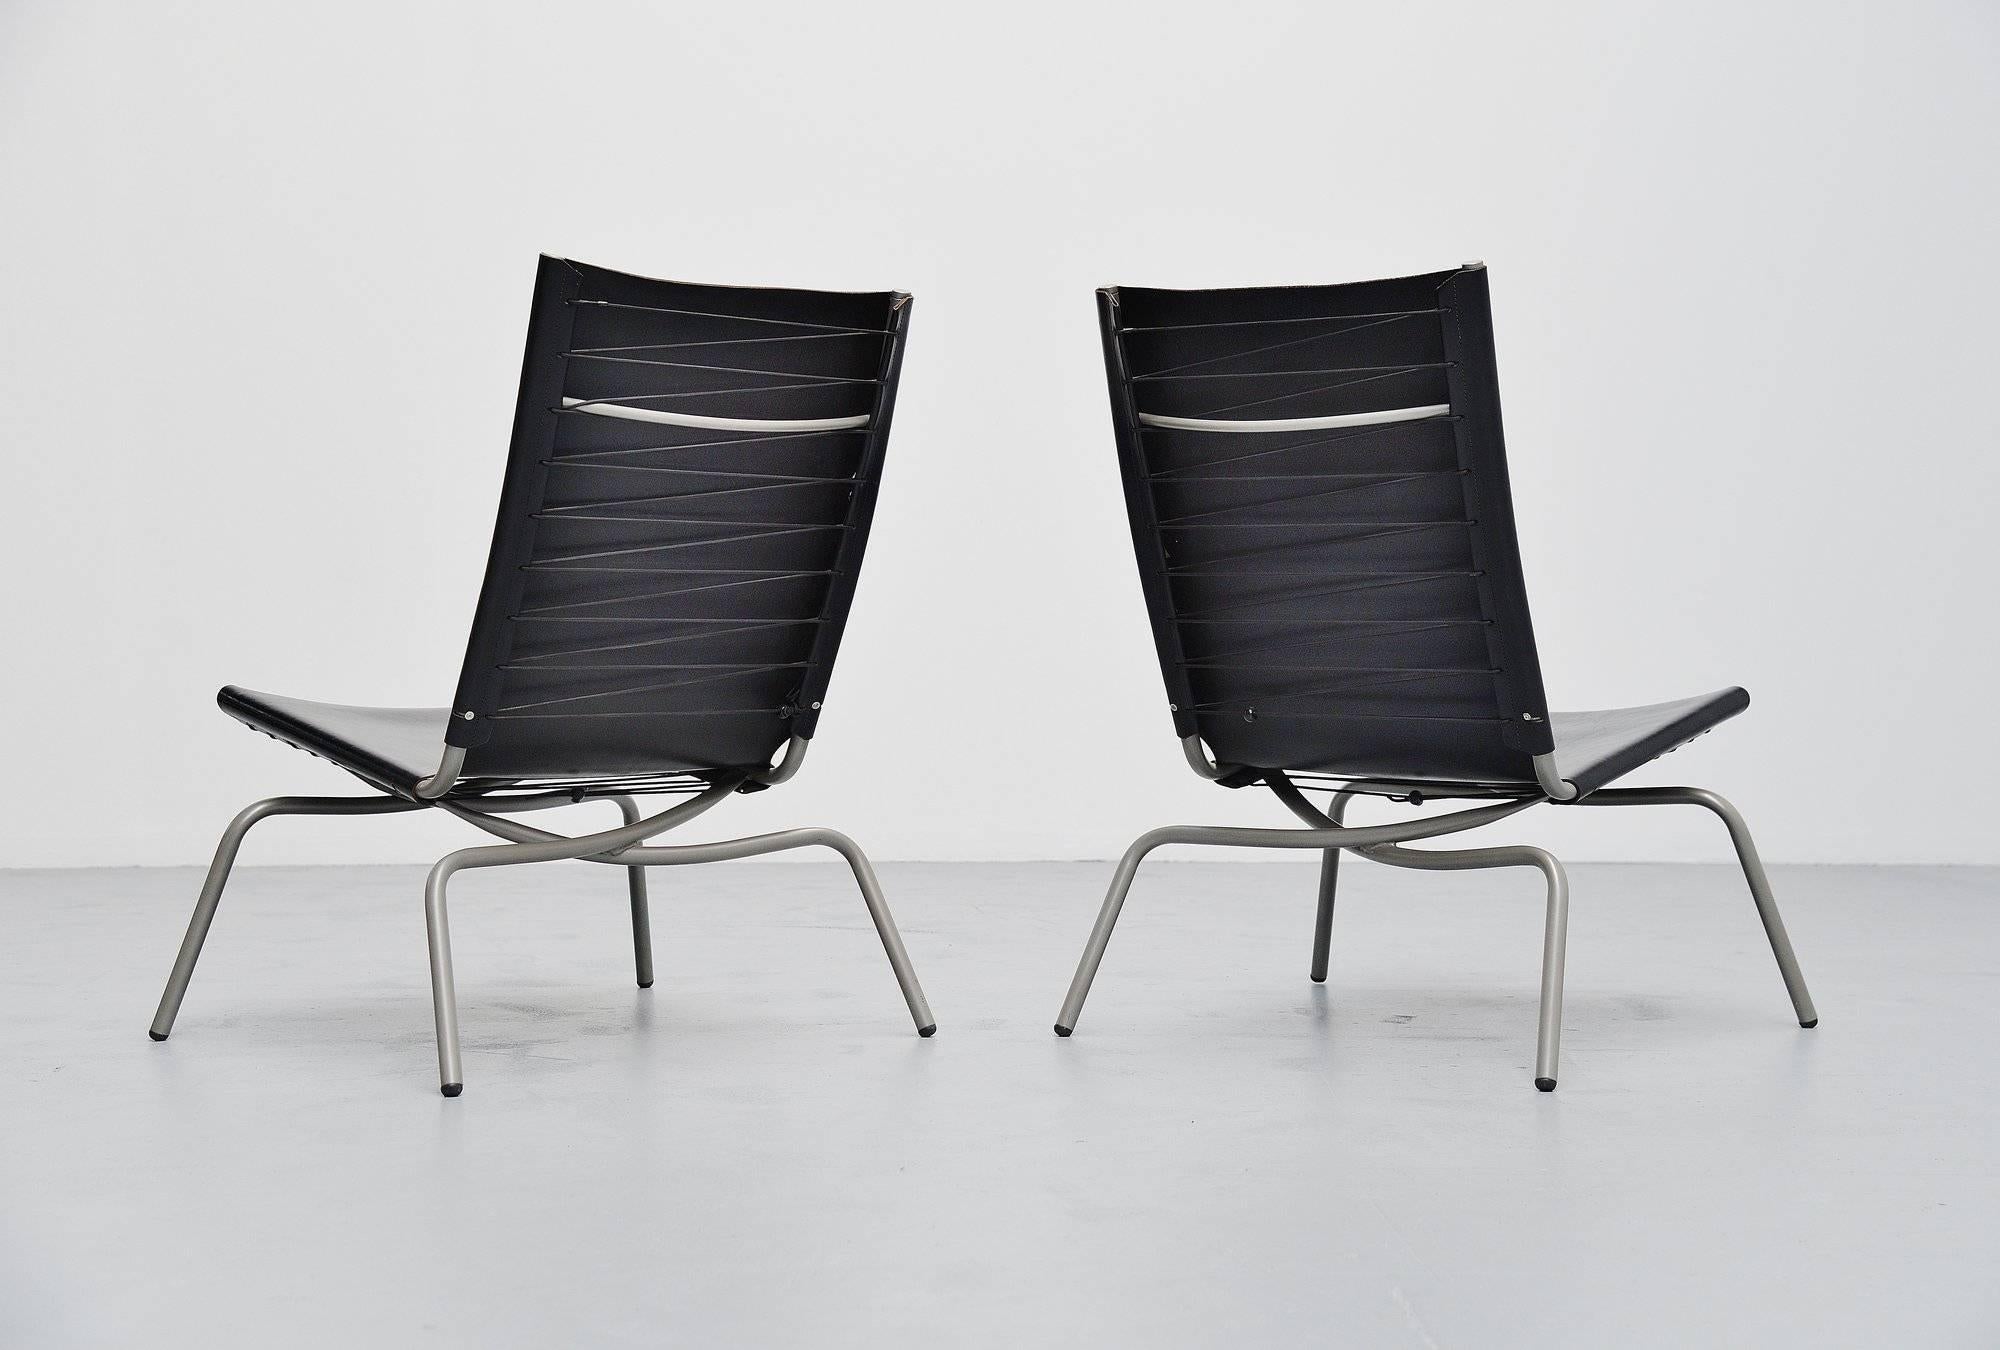 Very nice pair of the crossed legs chair designed by Fabiaan Van Severen in his own atelier, Belgium, 1998. These chairs were purchased directly from Fabiaan van Severen in 1999. The chairs have a grey coated metal tubular frames and very thick